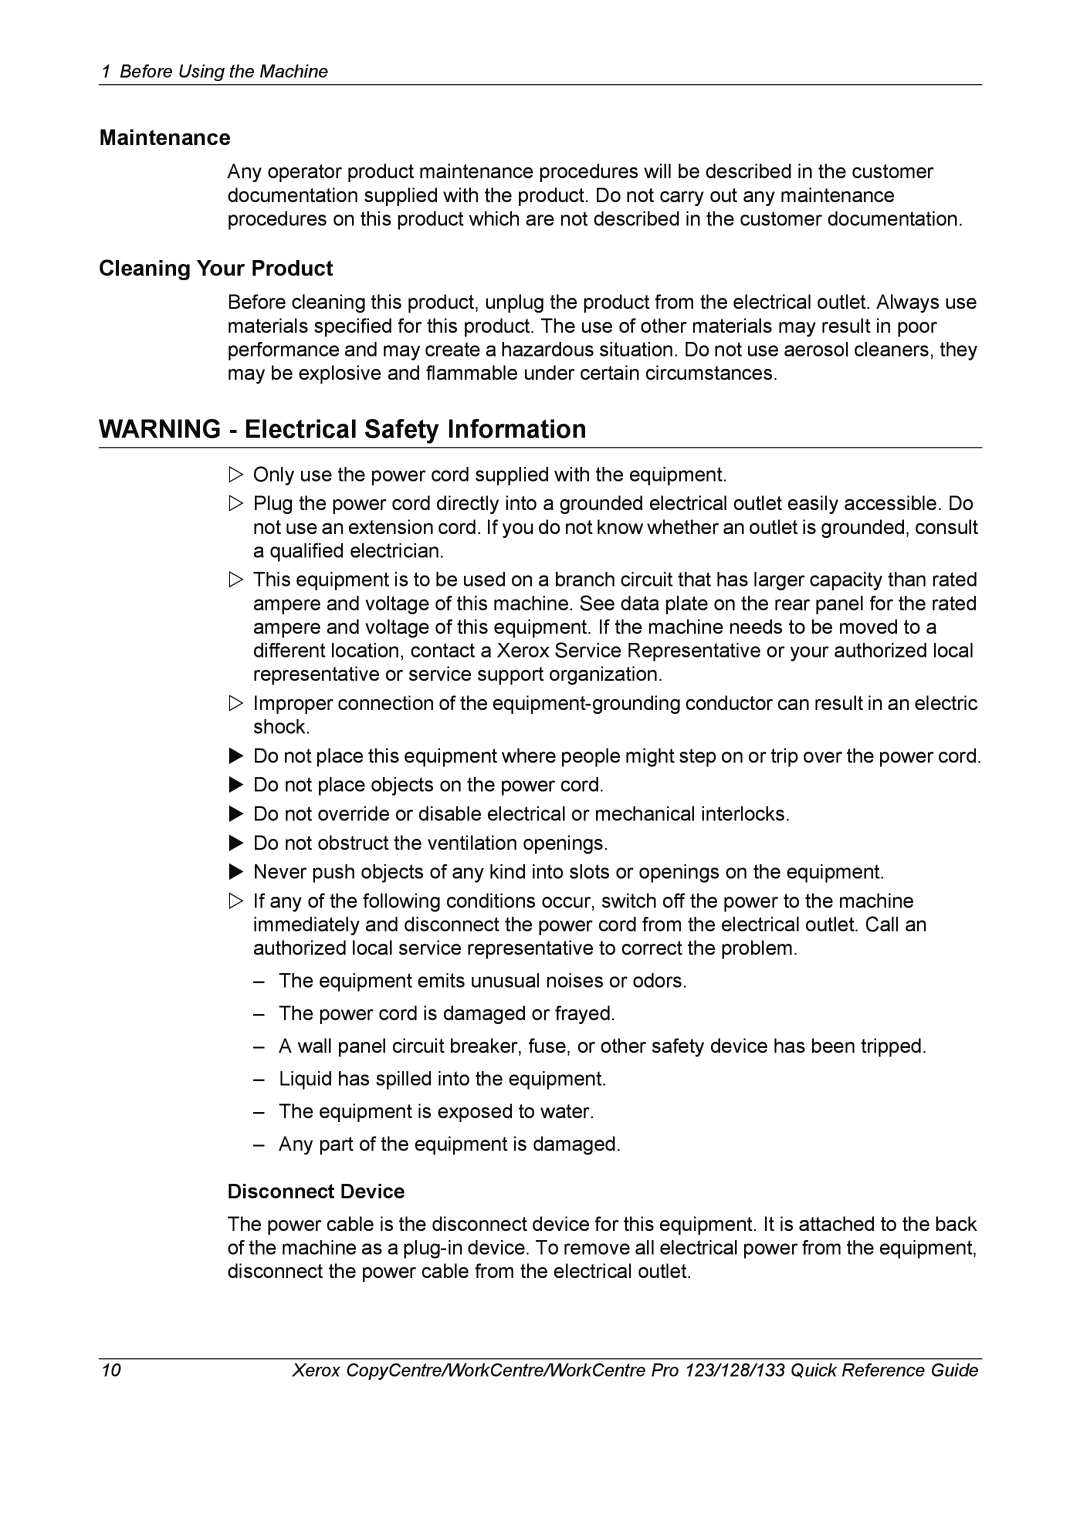 Xerox 604P18037 manual WARNING - Electrical Safety Information, Maintenance, Cleaning Your Product, Disconnect Device 